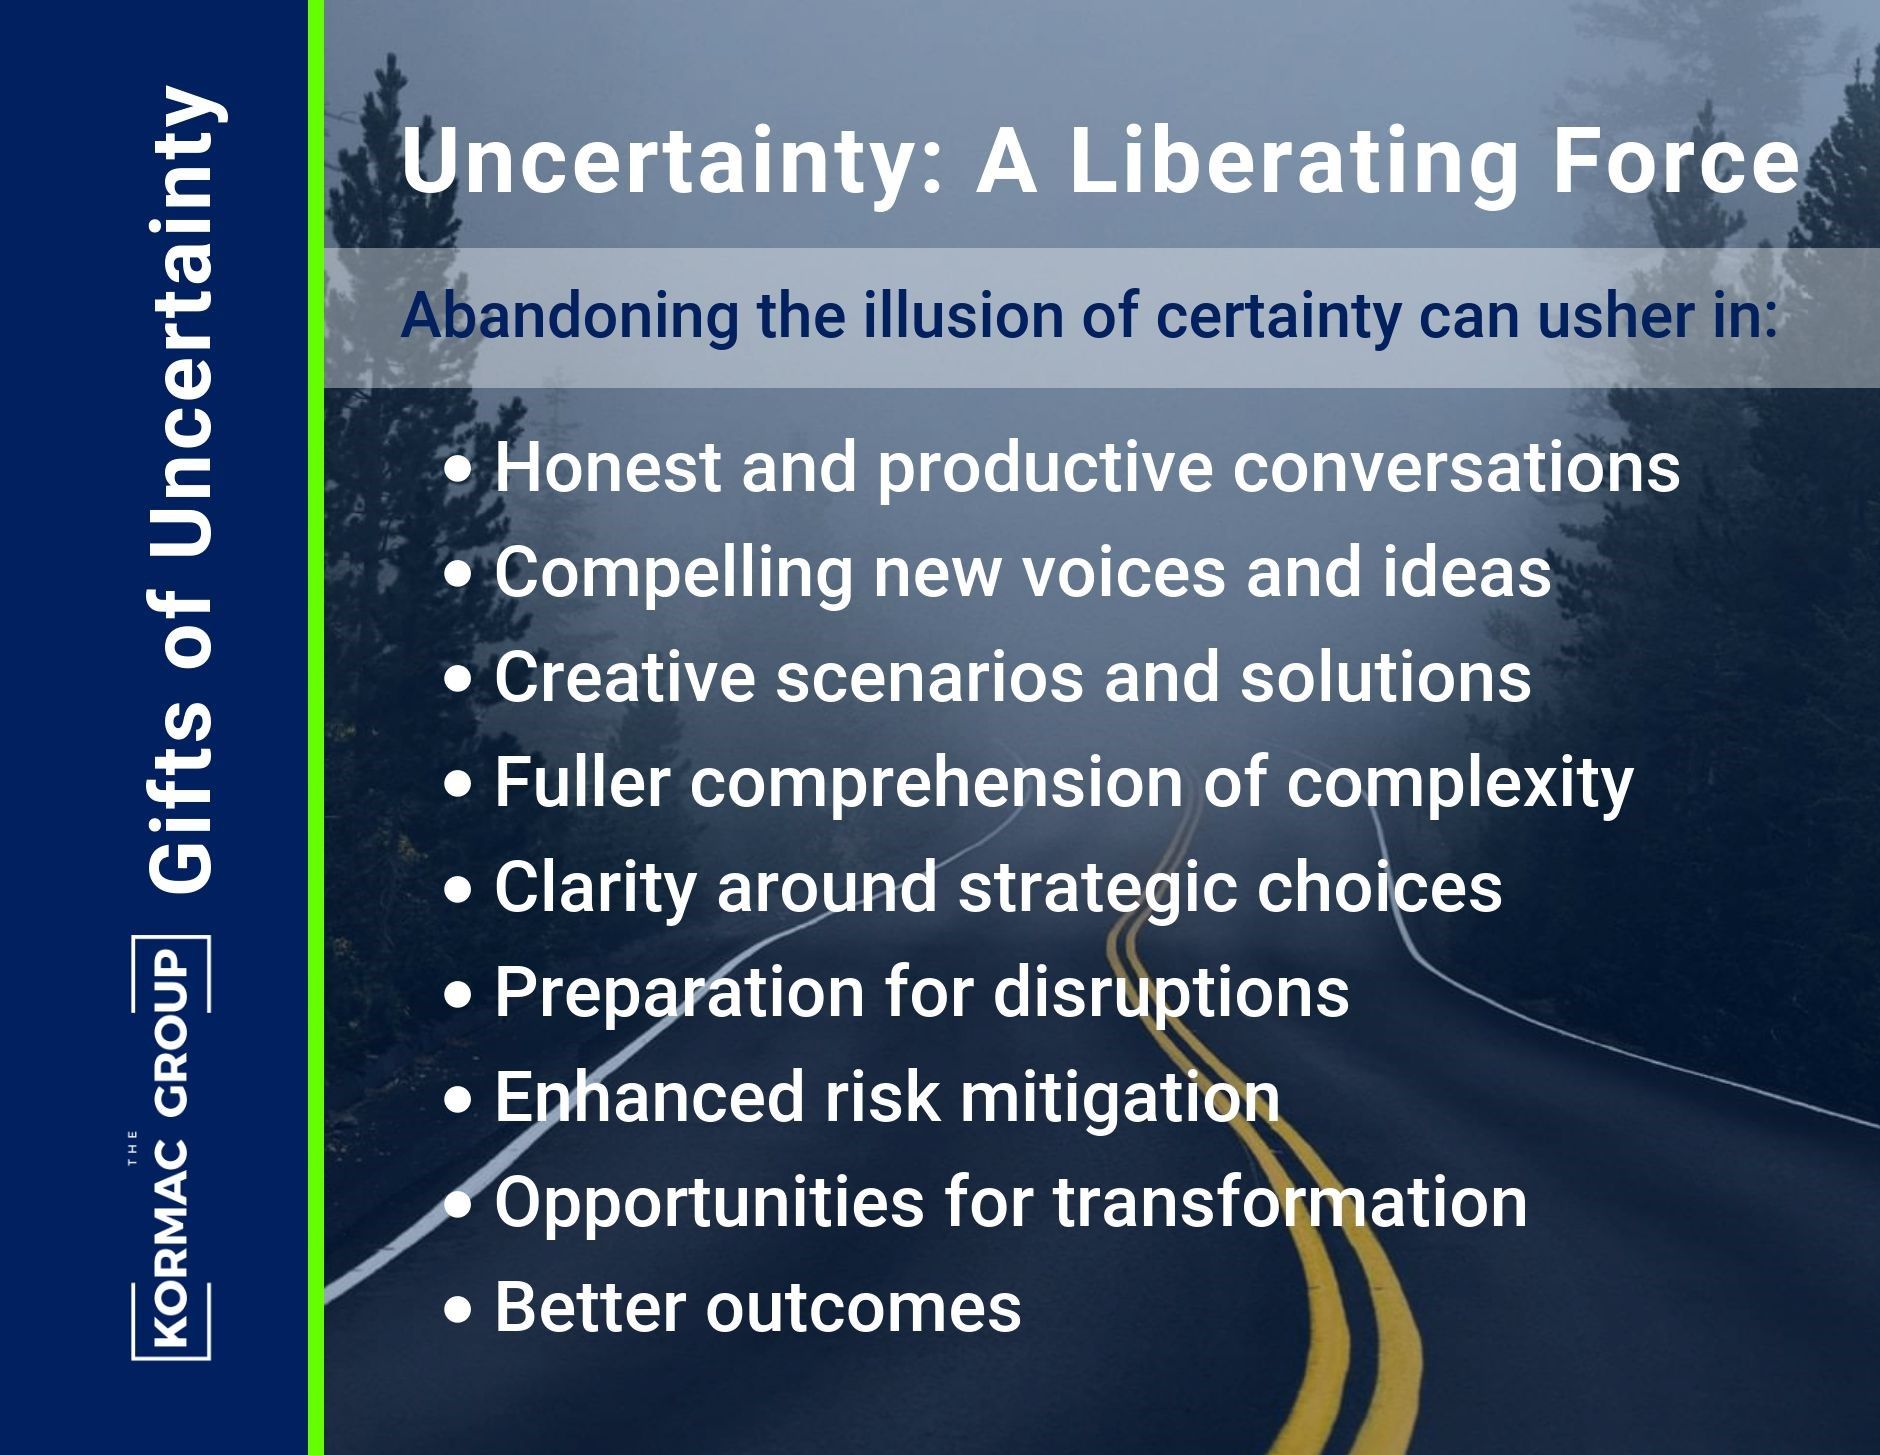 Gifts of Uncertainty Uncertianty: A Liberating Force Abandoning the illusion of certainty can usher in: - honest and productive conversations - compelling new voices and ideas - creative scenarios and solutions - fuller comprehension of complexity - clarity around strategic choices - preparation for disruptions - enhanced risk mitigation - opportunities for transformation - better outcomes